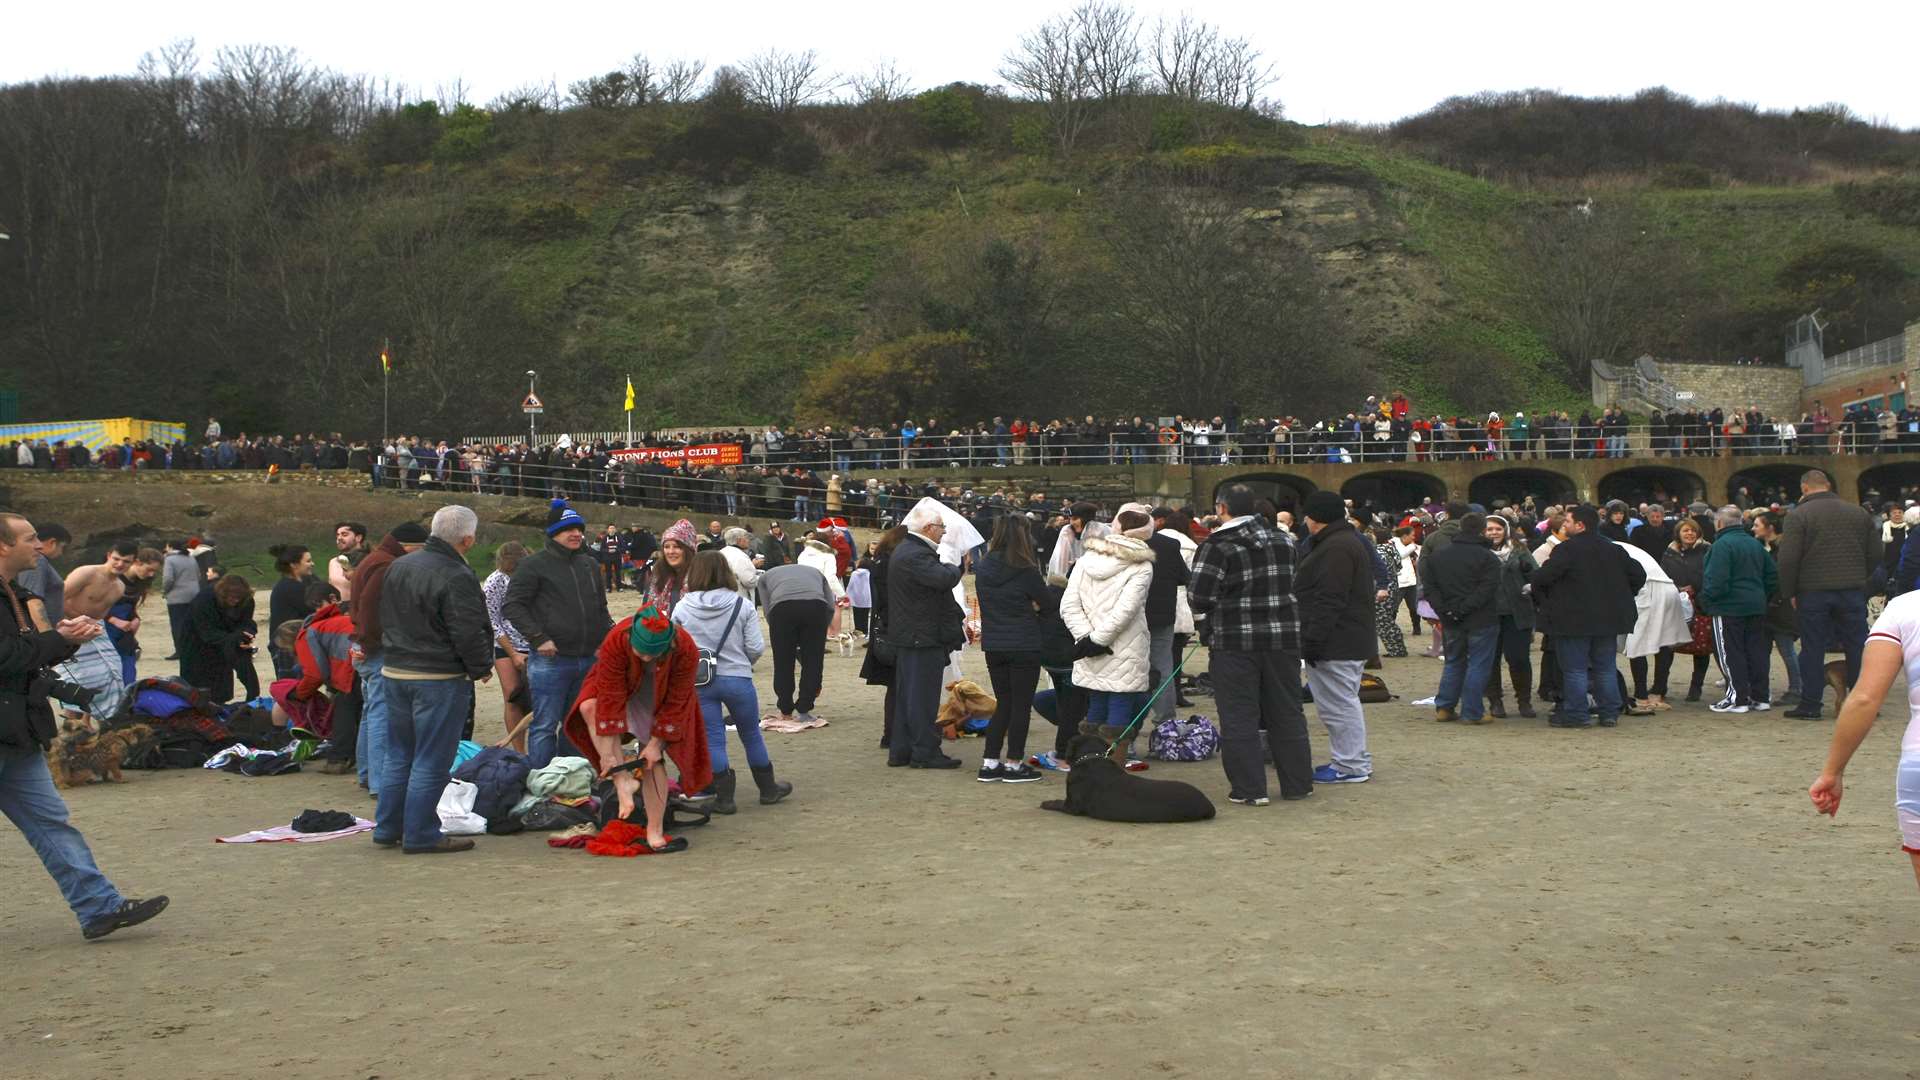 Hundreds of people gathered to watch the annual event